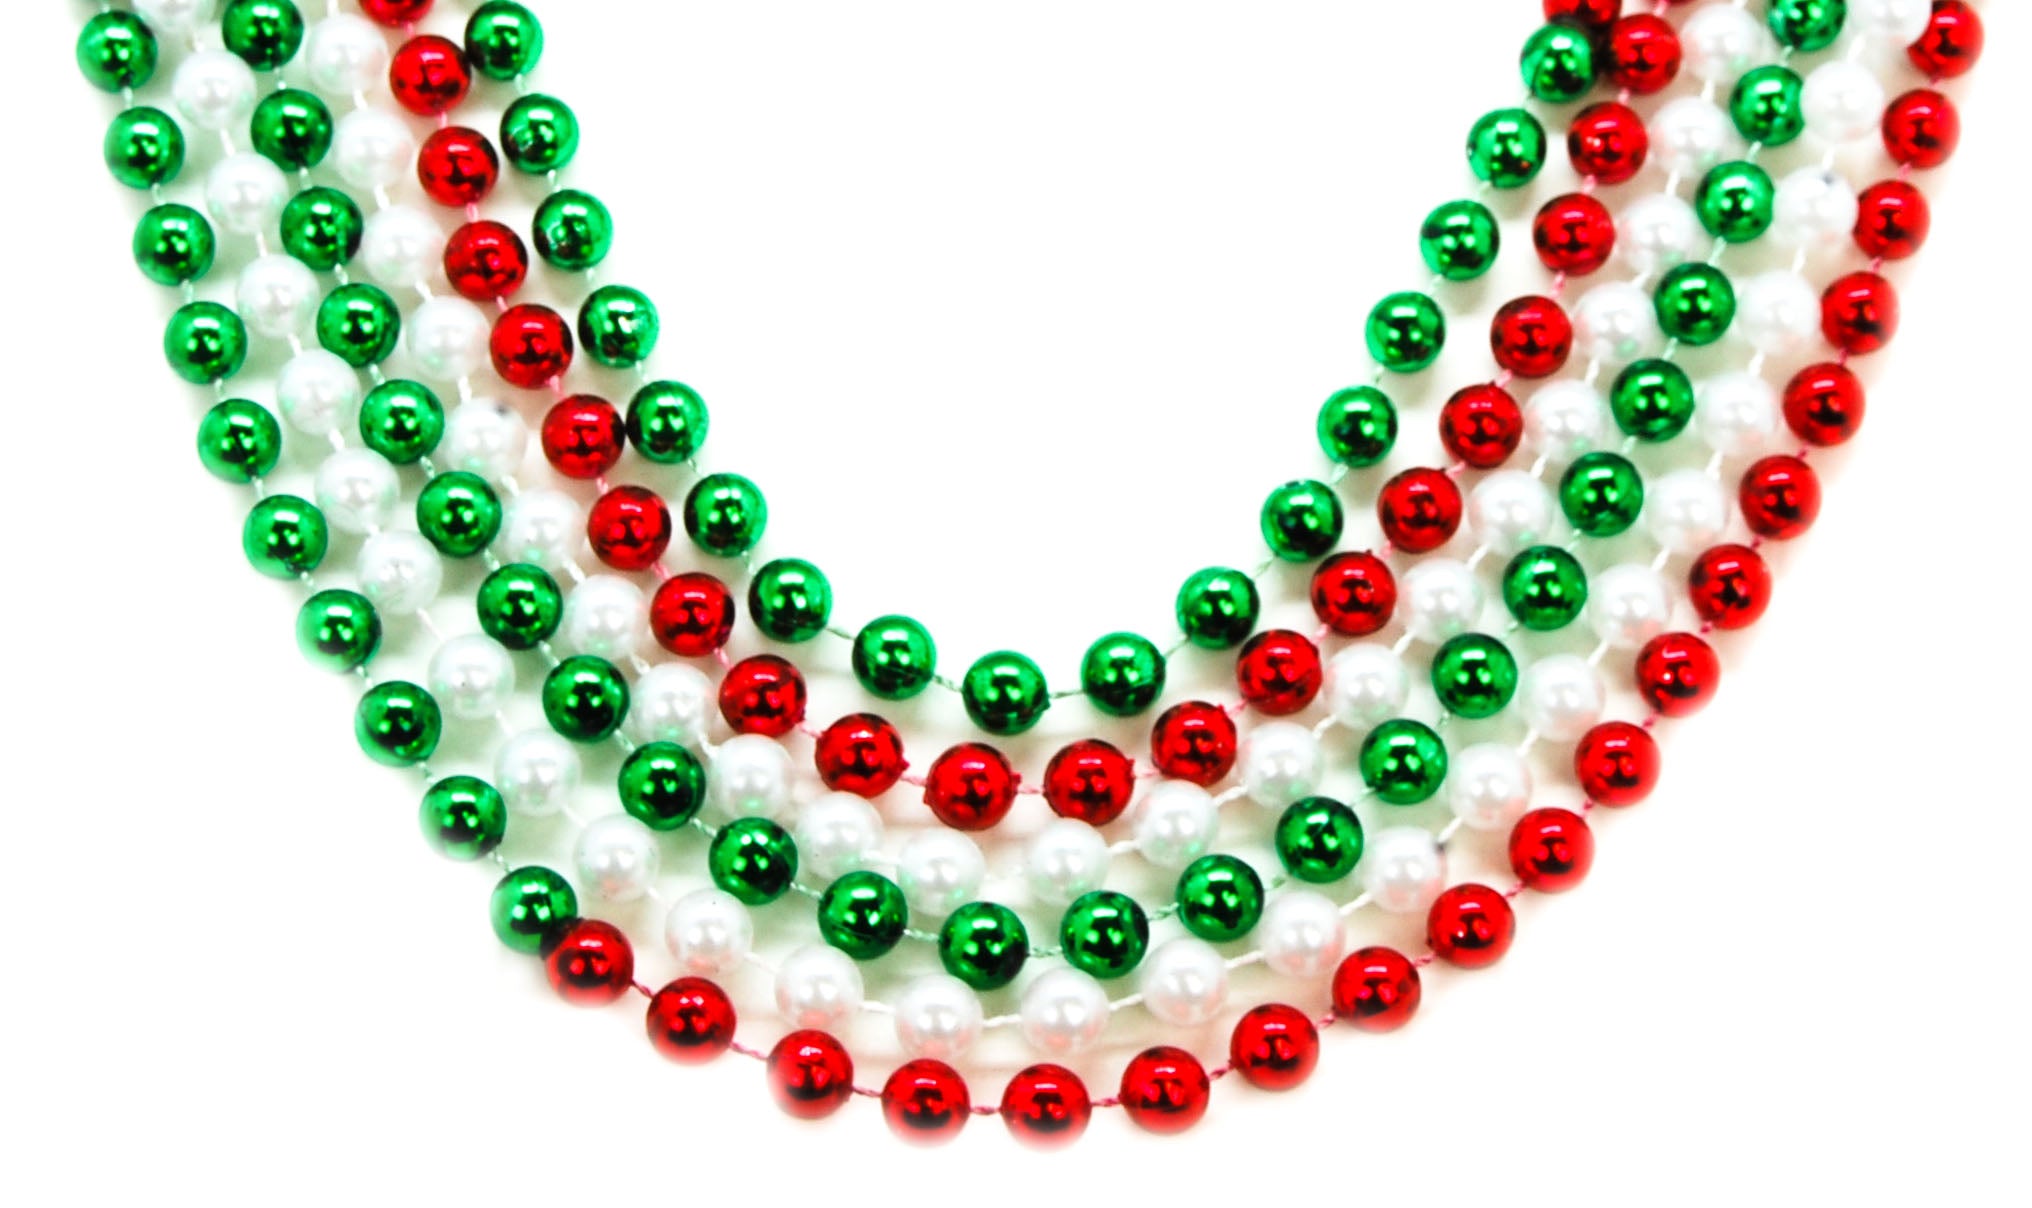 40" 10mm Round Beads Red, Green, and White Sectional